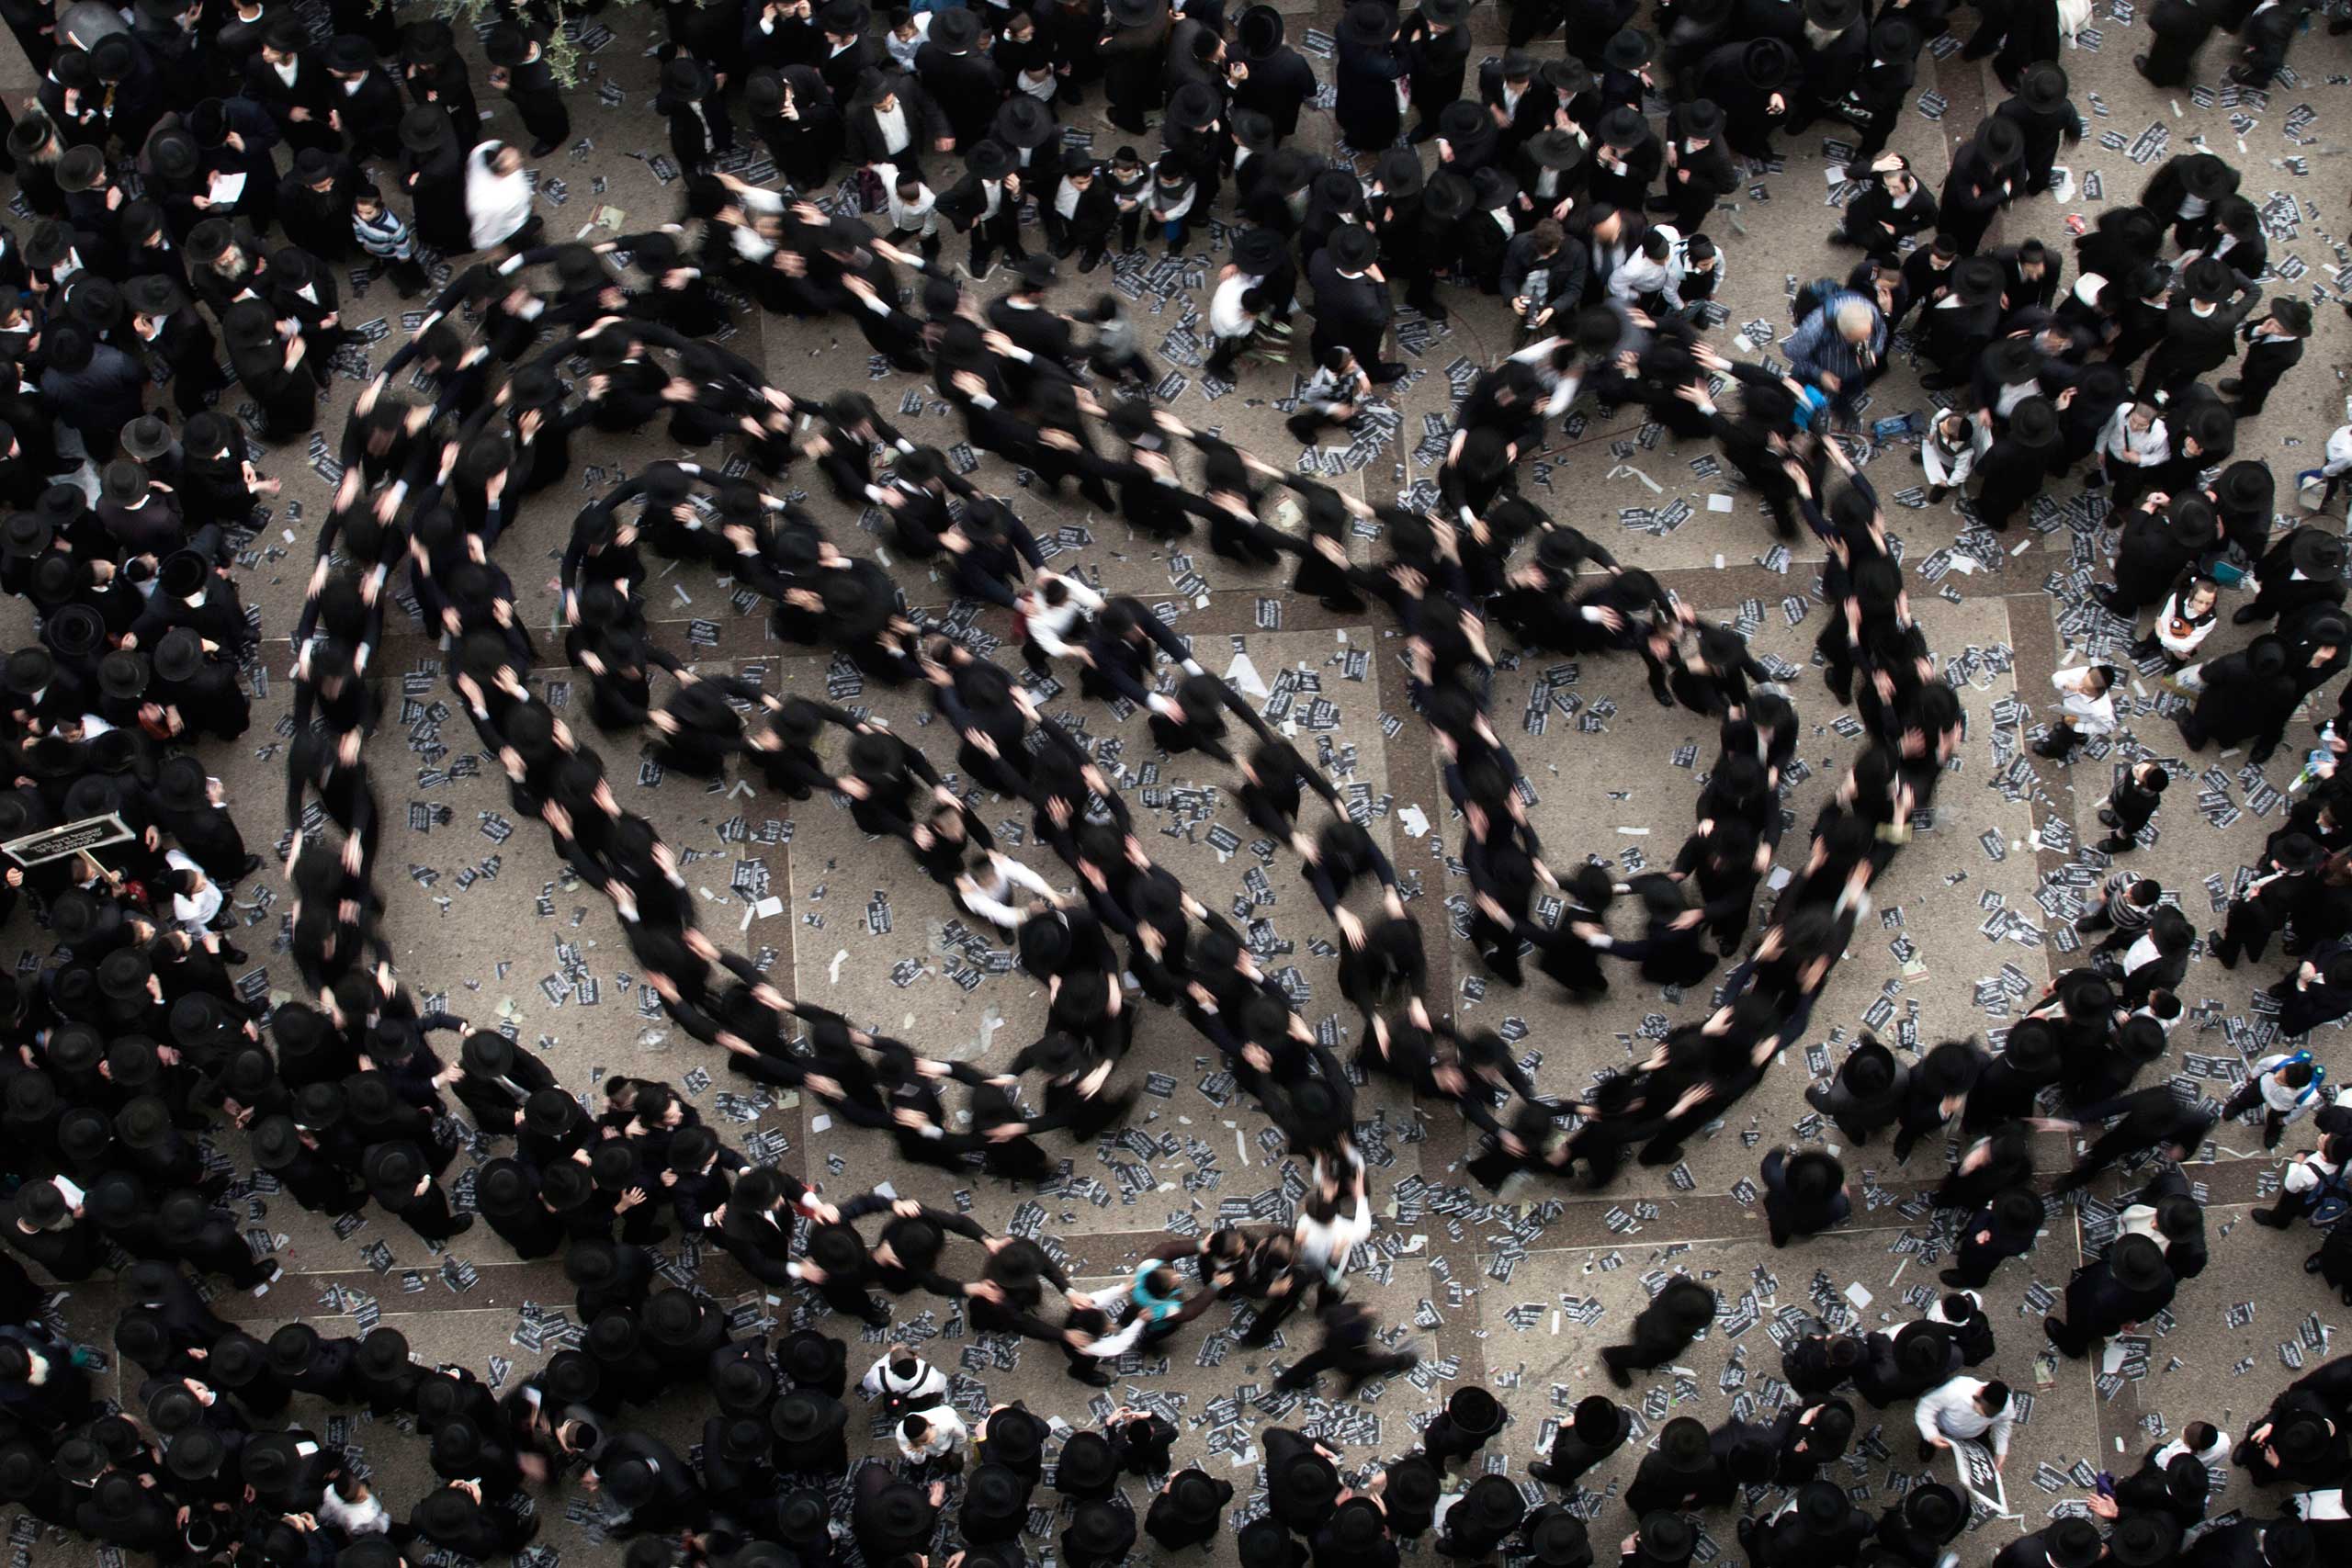 Israel: Protest against new conscription lawsUltra-Orthodox Jews dance as they gather for a mass prayer in protest to the government's army conscription laws in Jerusalem, March 2, 2014.